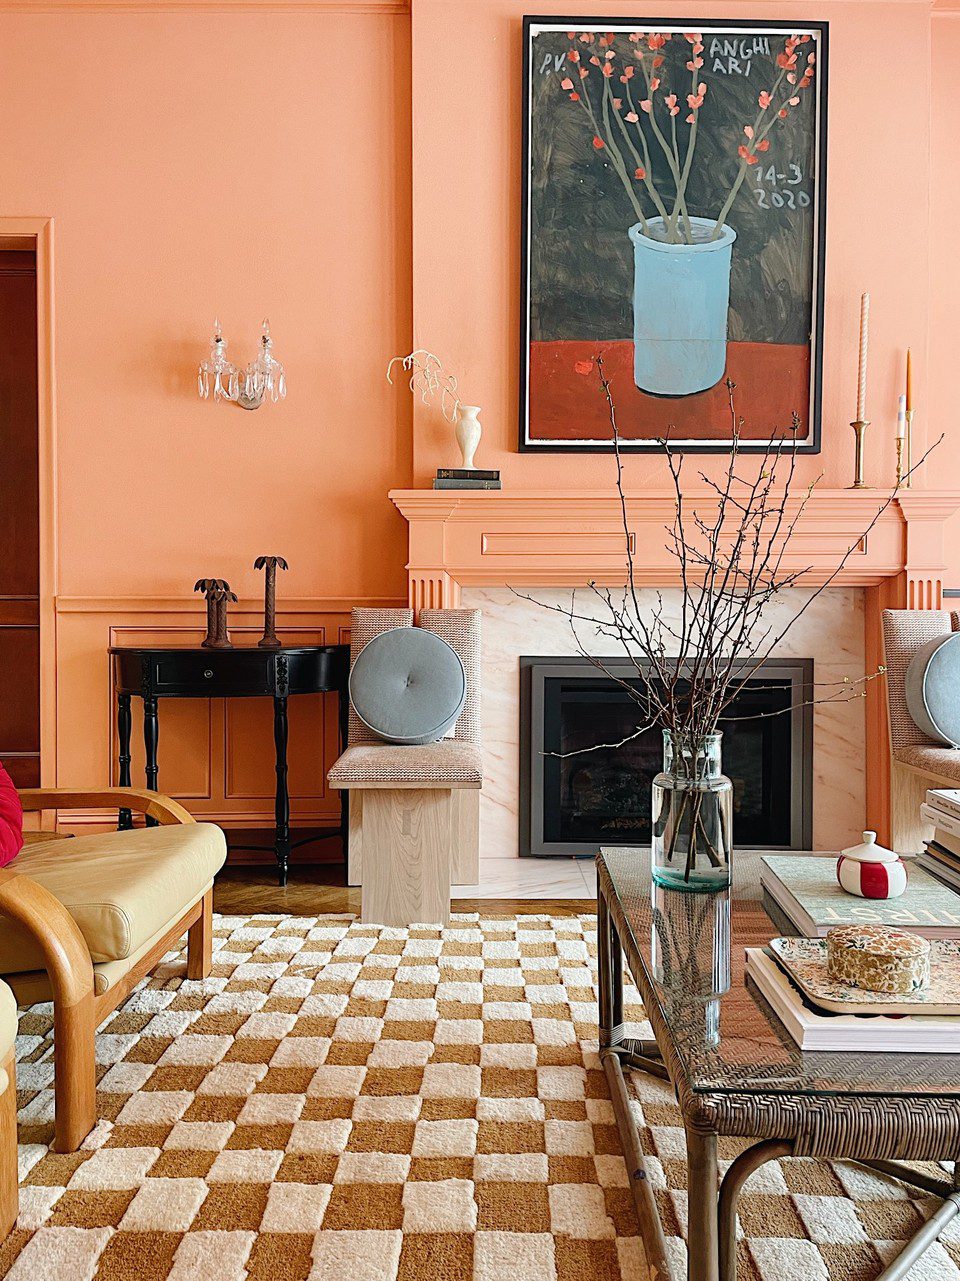 Peach living room with artwork over the fireplace, a checkerboard rug, and a woven coffee table with a glass top.